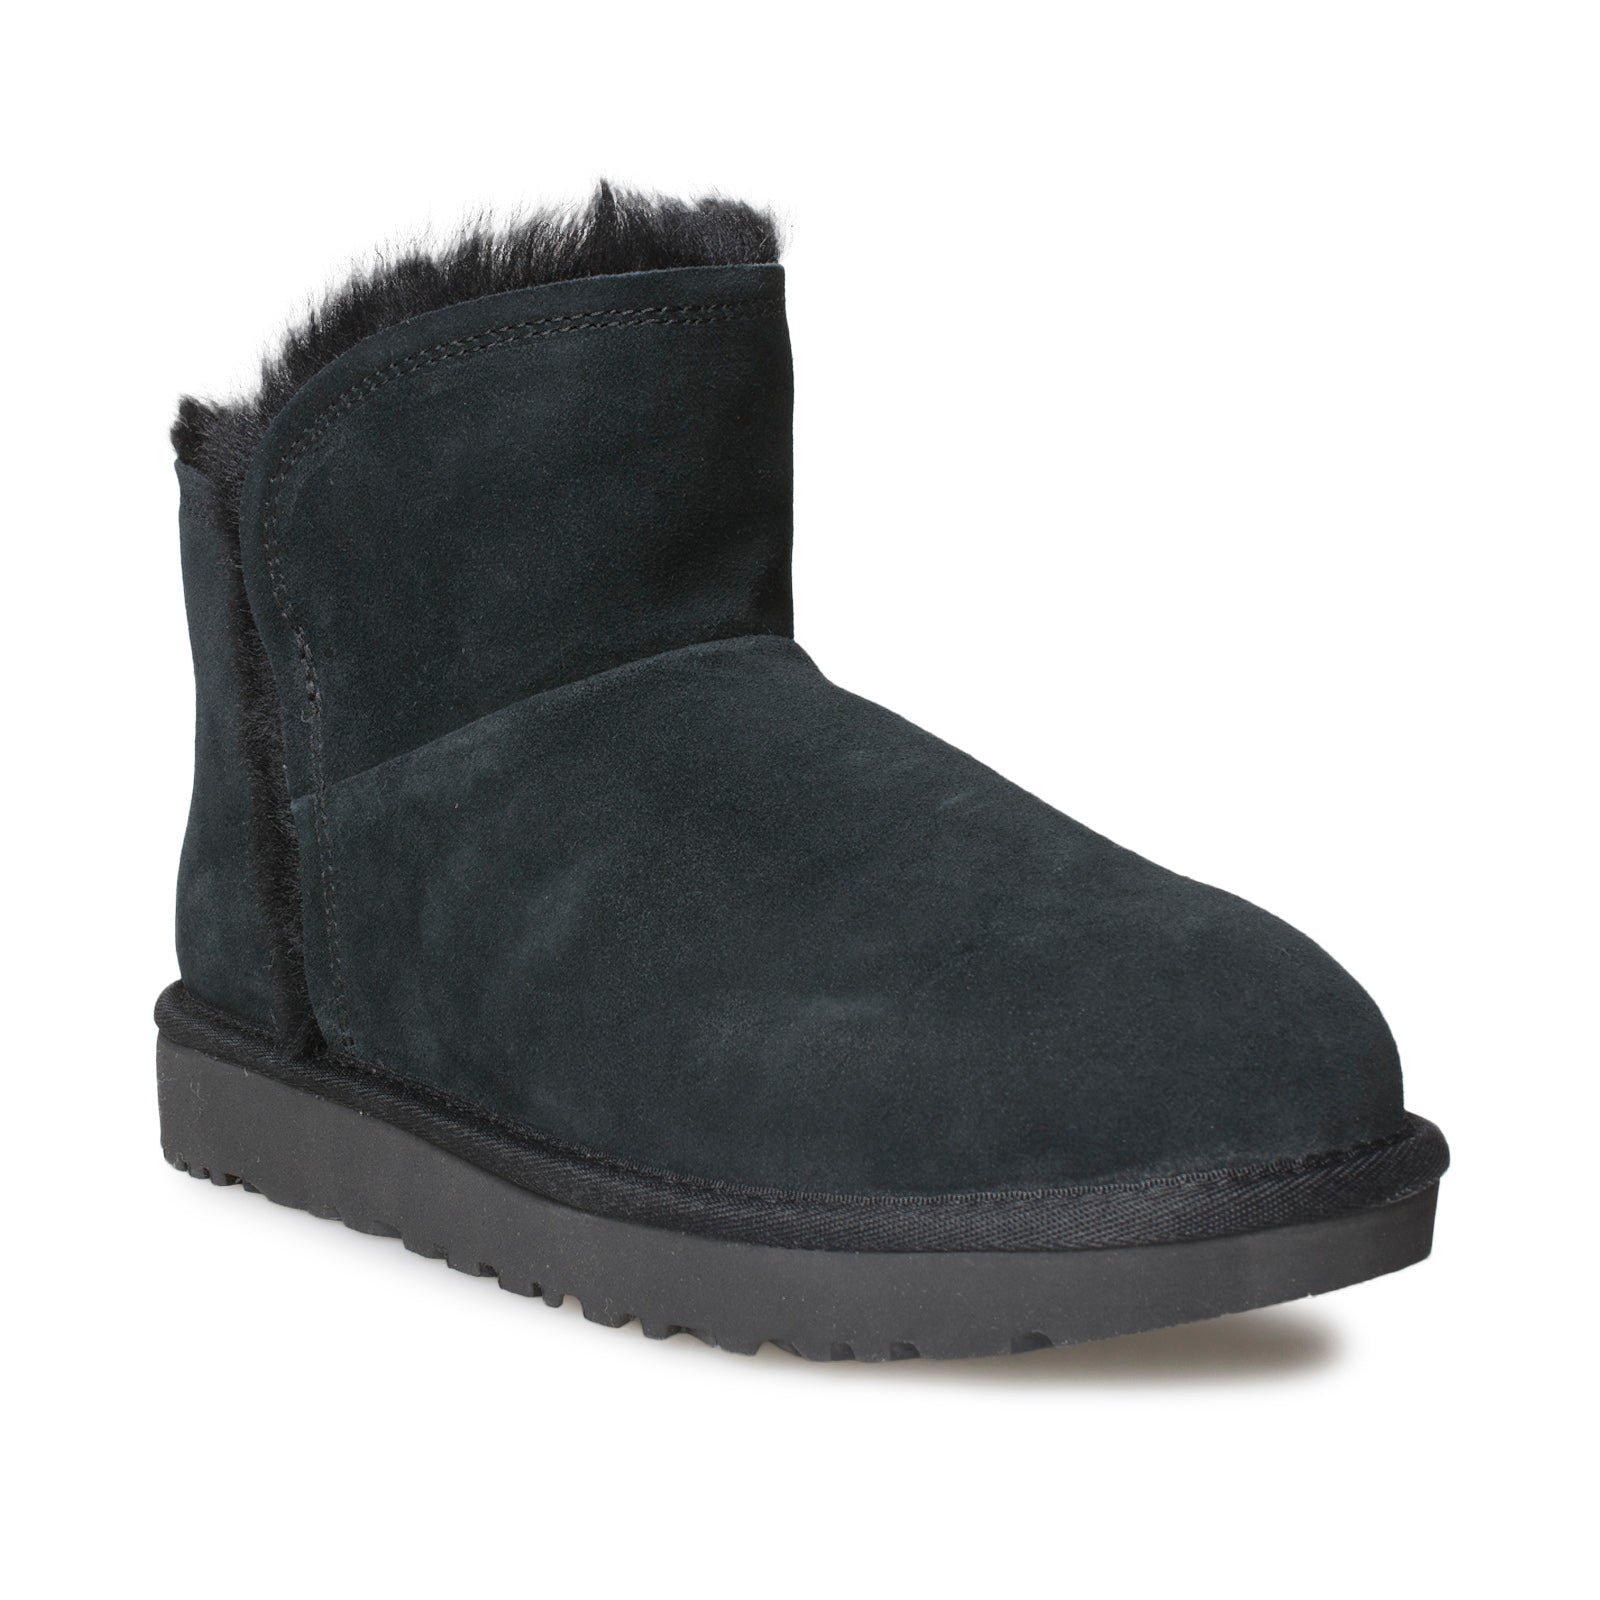 ugg low boots